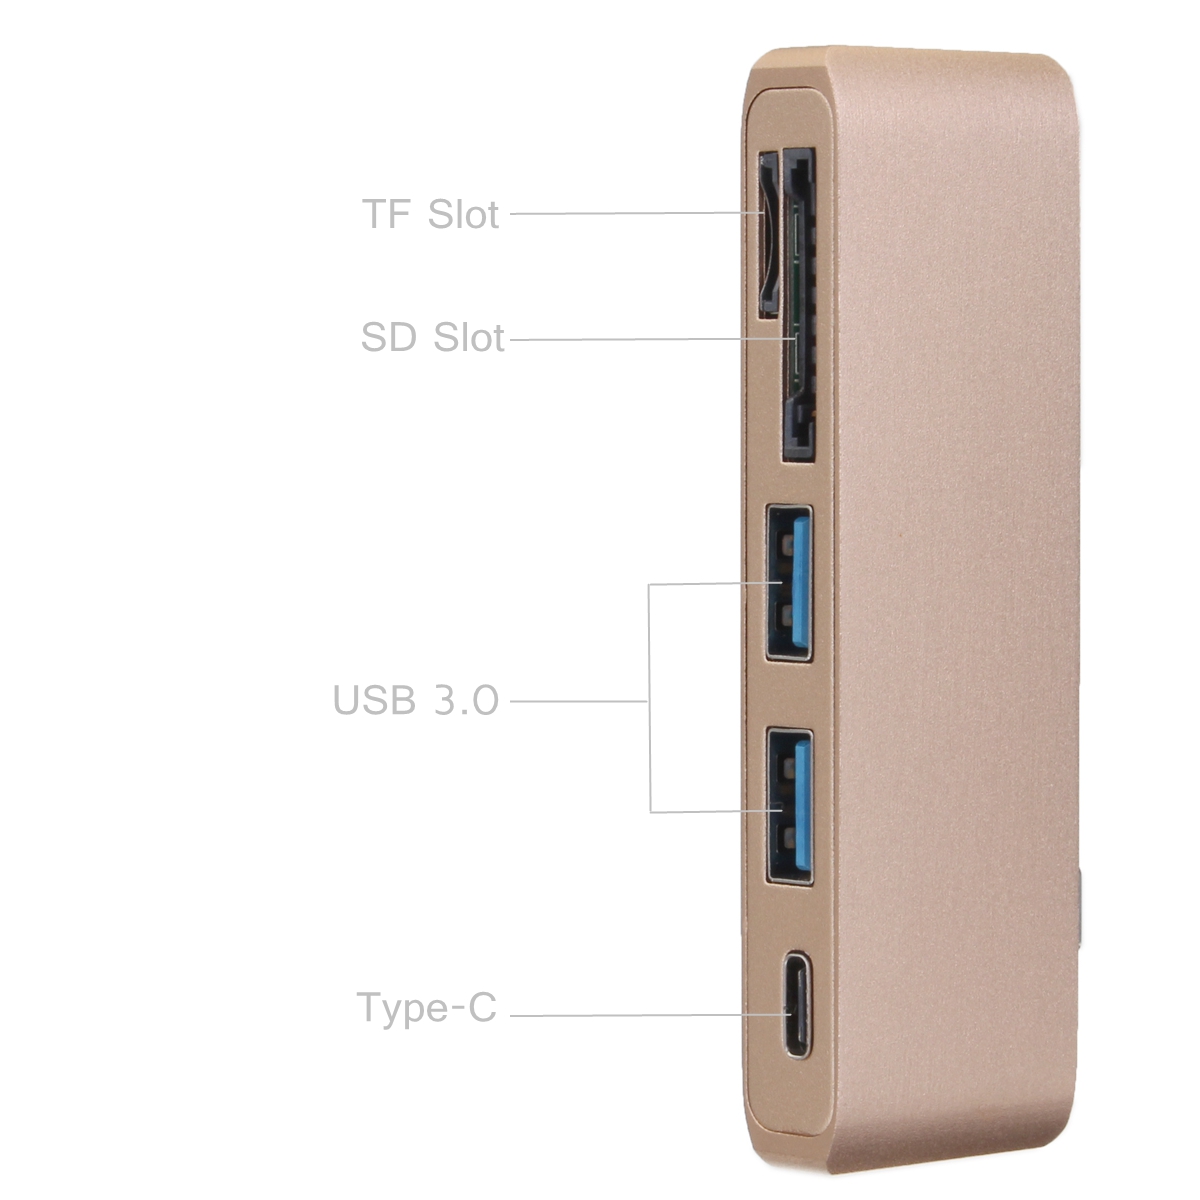 Multifunction-USB-Hub-Type-C-to-Type-C-USB-30-2Ports-TF-SD-Card-Reader-for-Laptop-PC-1153671-1